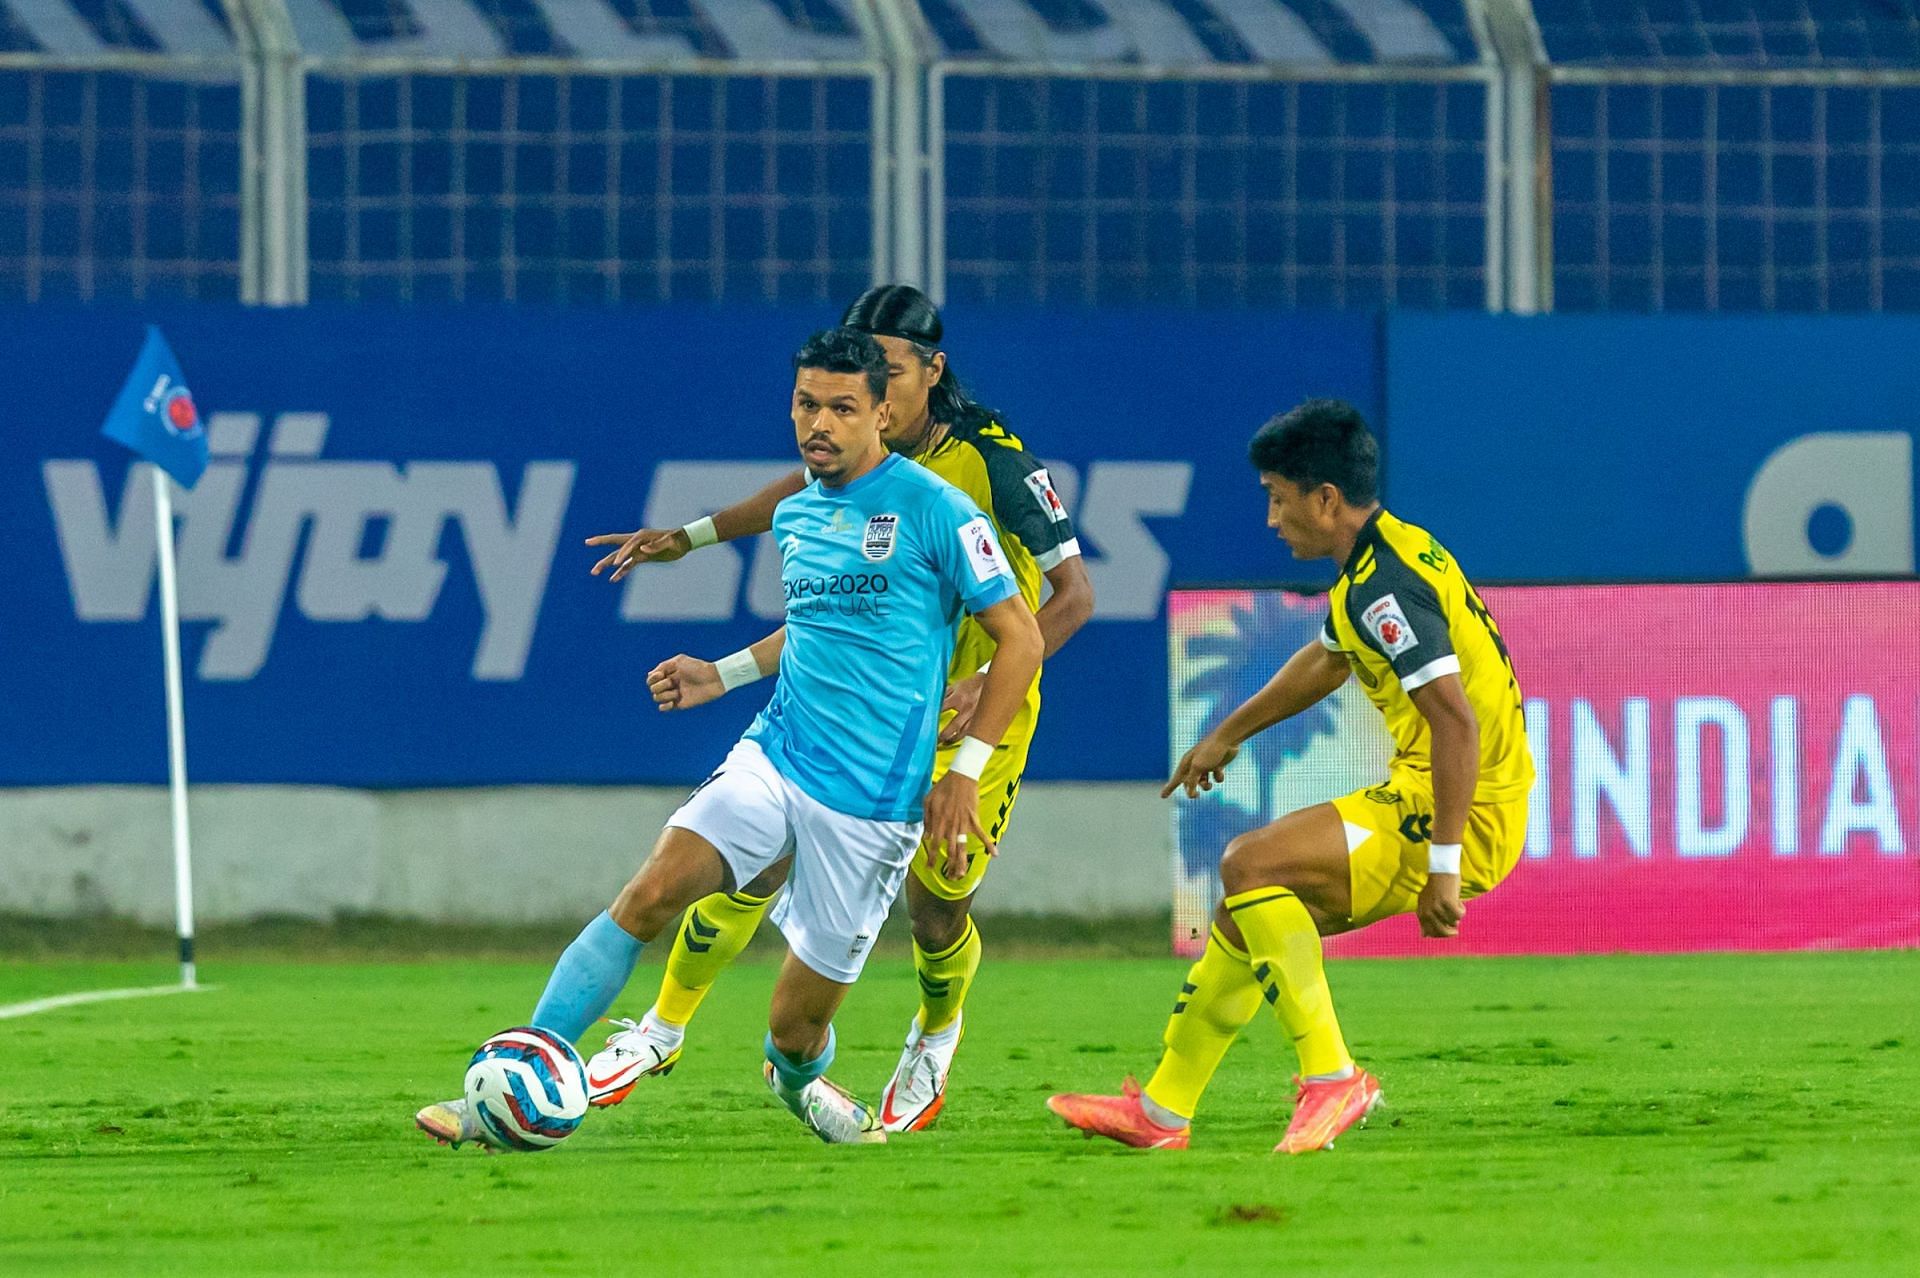 Cassio managed to secure an assist today (Image courtesy: ISL Media)